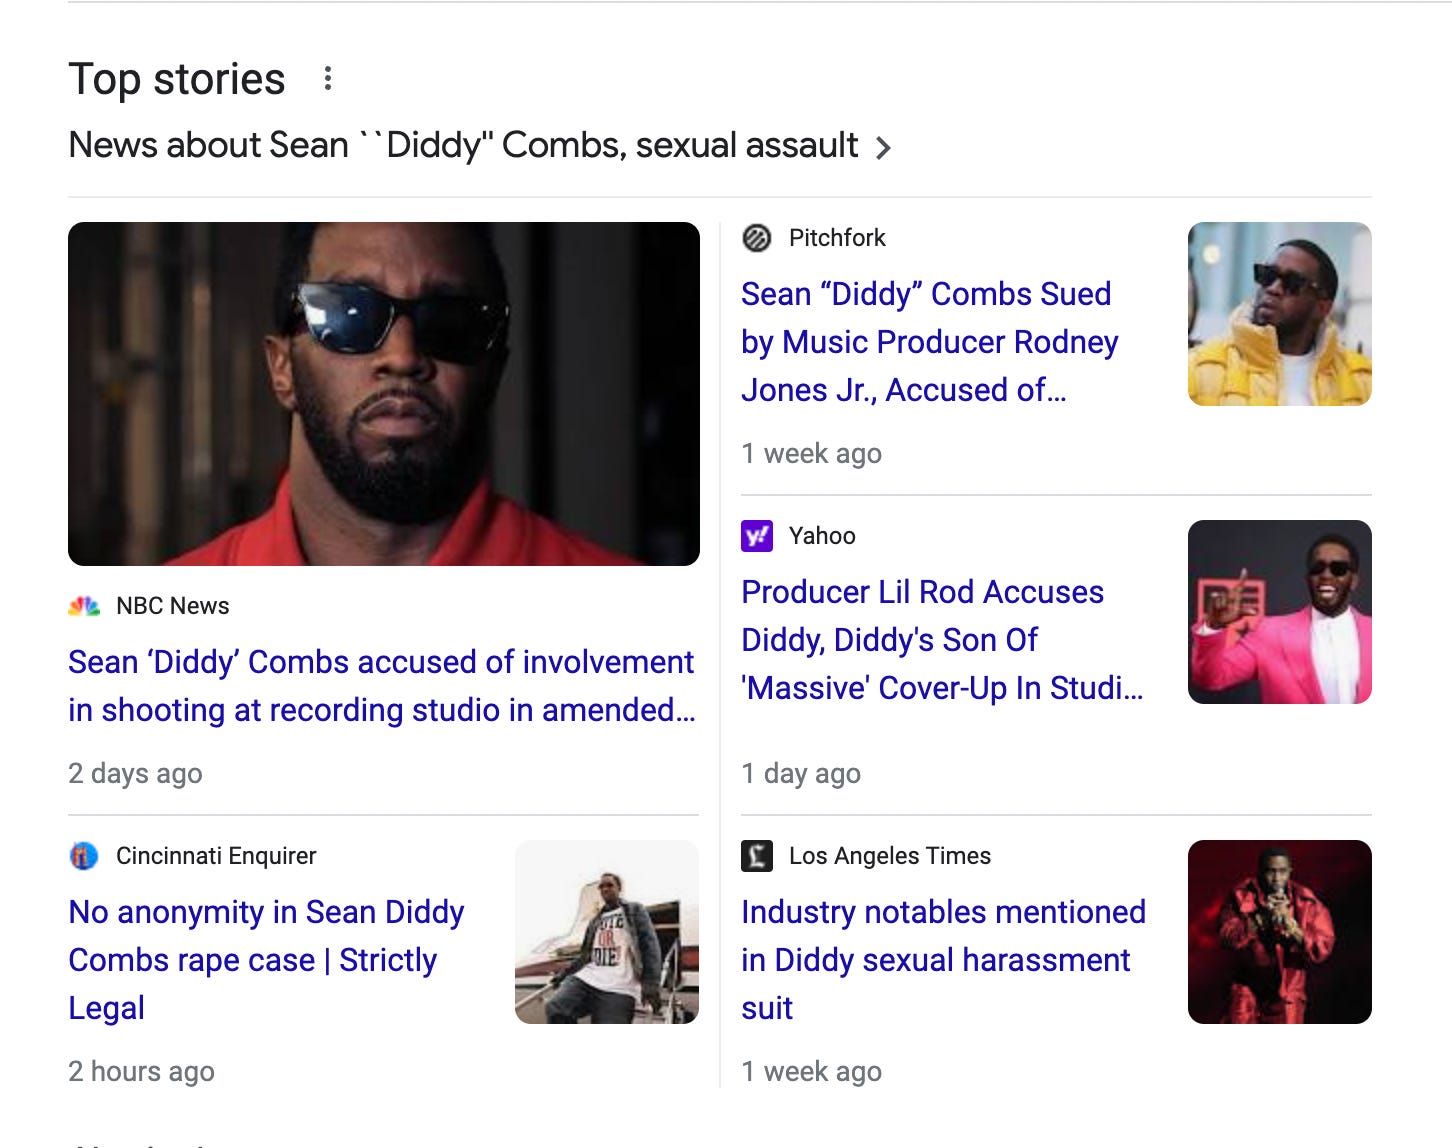 google search shows five stories in the past week about Diddy rape, Diddy shooting, Diddy coverup ...